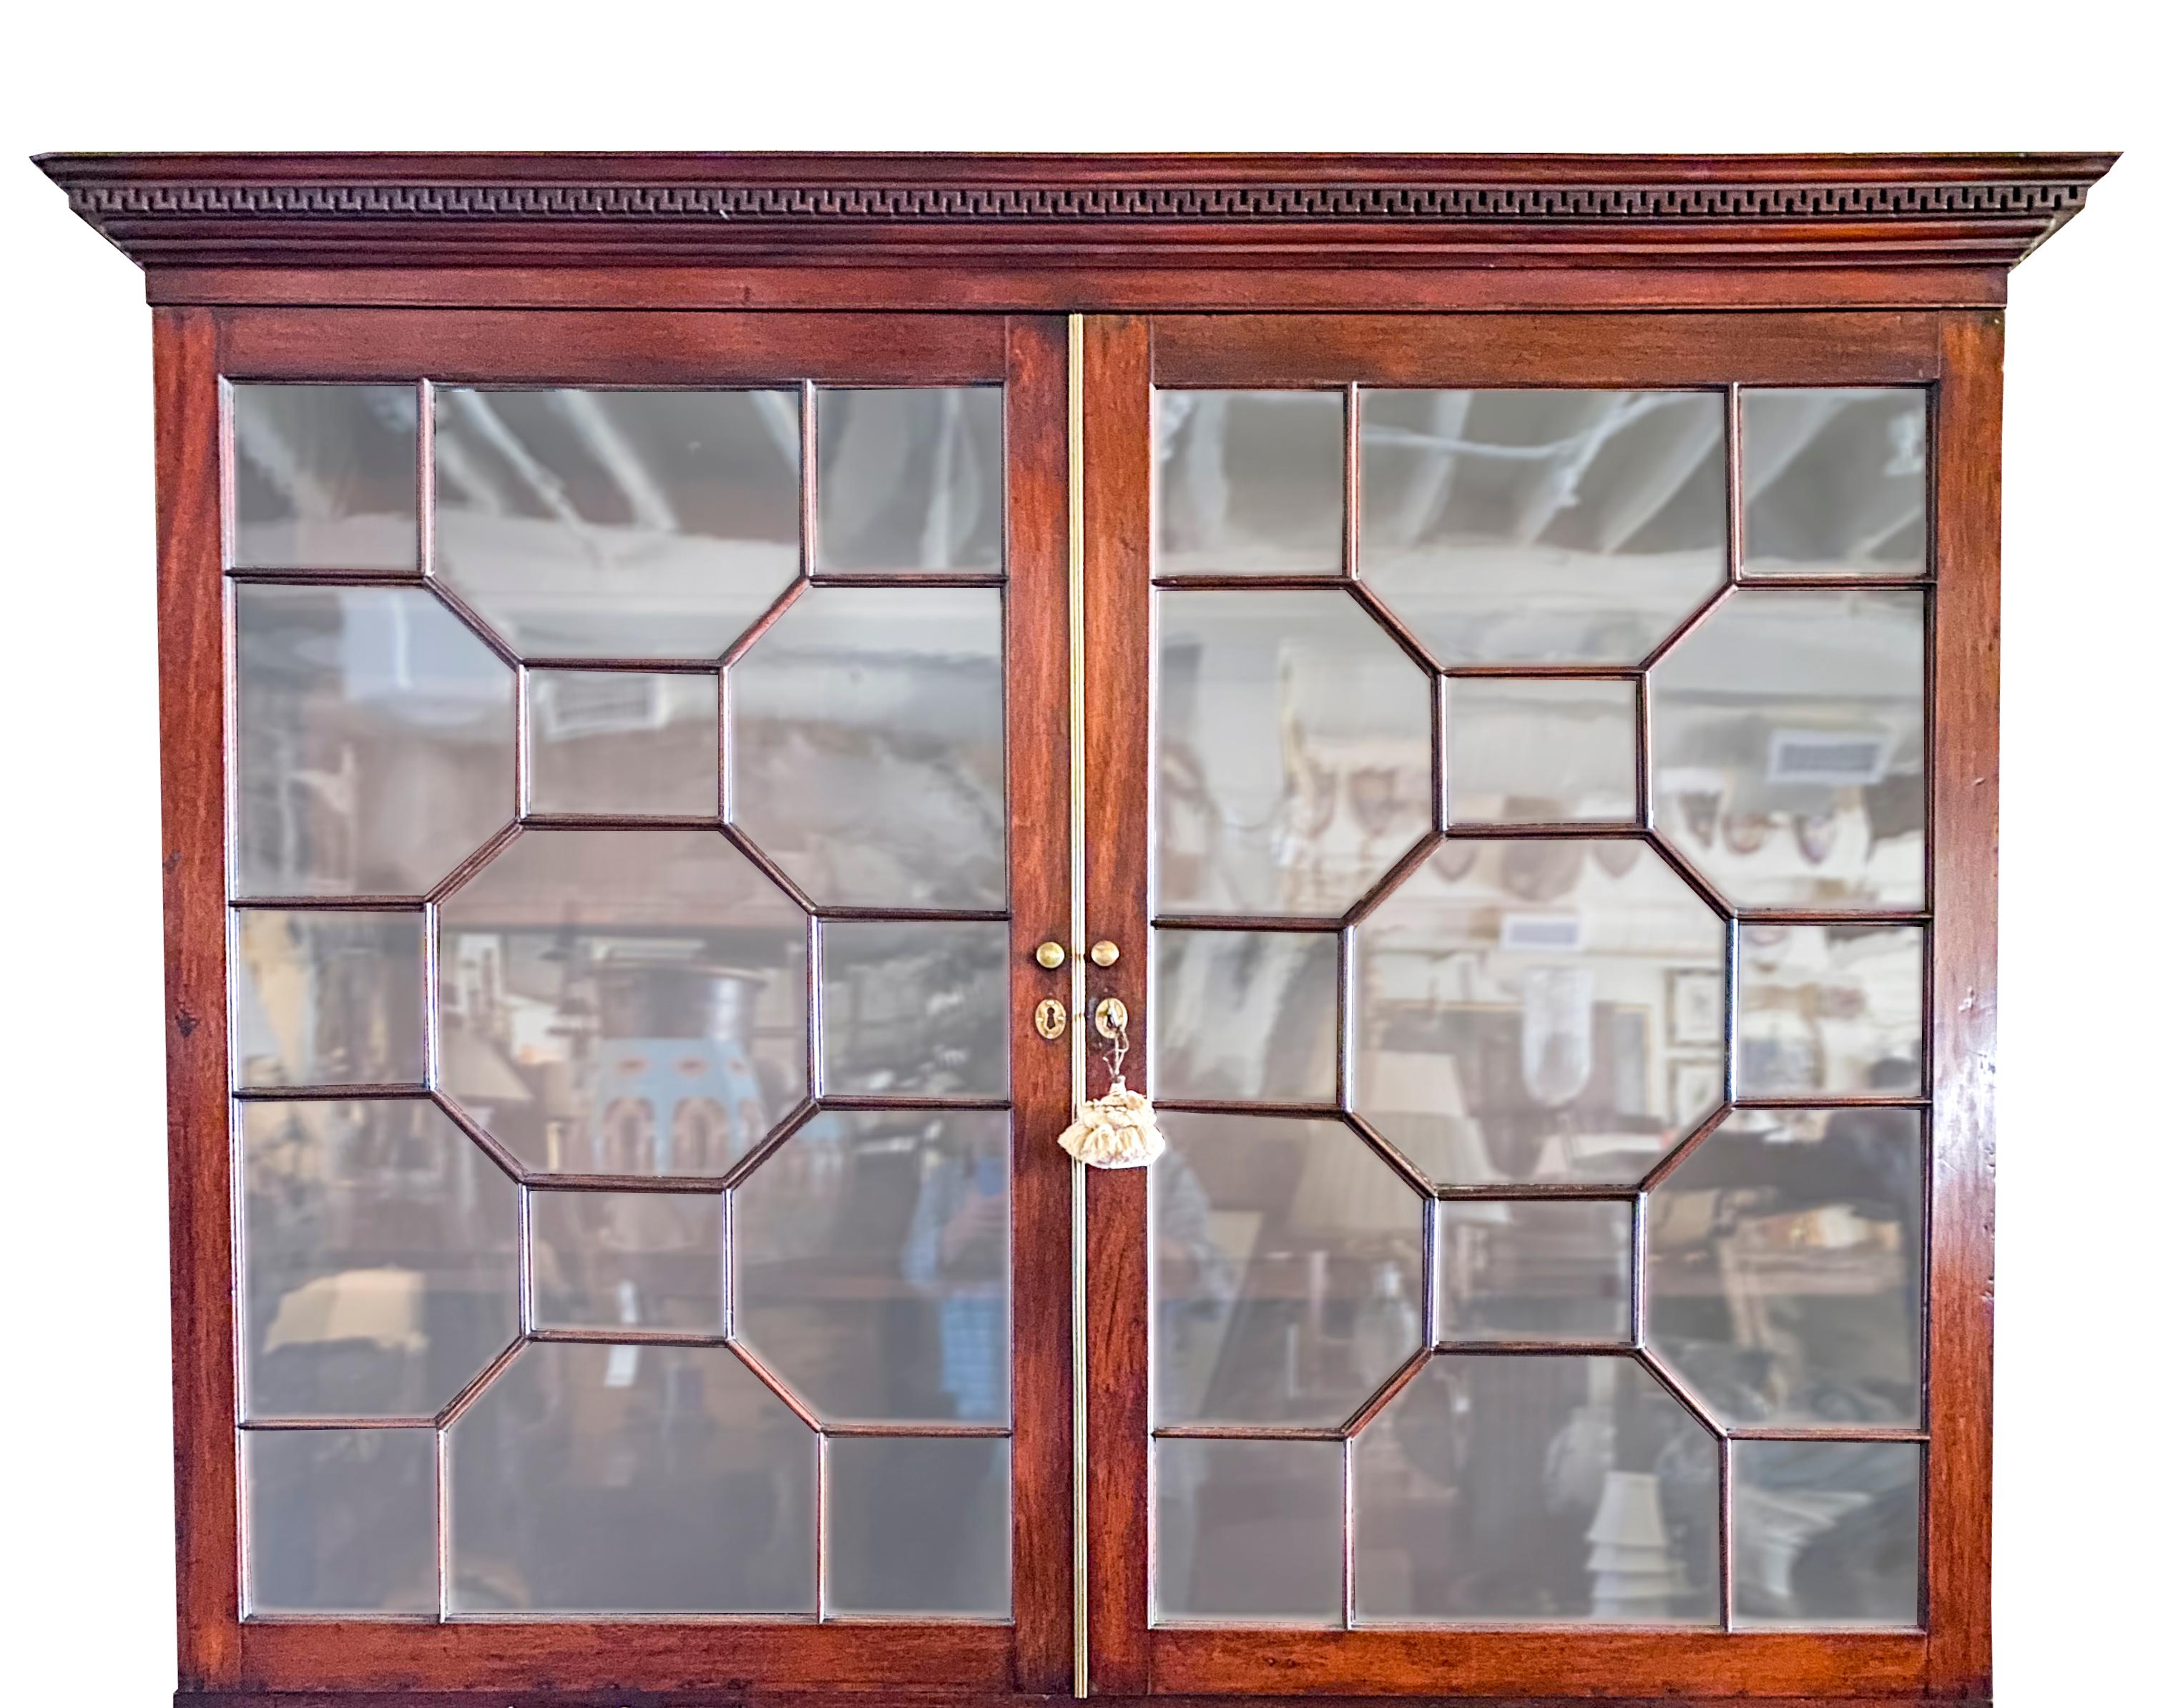 With rectangular dentilled cornice over a pair of doors with Chinese Chippendale mullions enclosing adjustable shelves over a double hinged paneled door and a single paneled door. Plinth base. Keys.